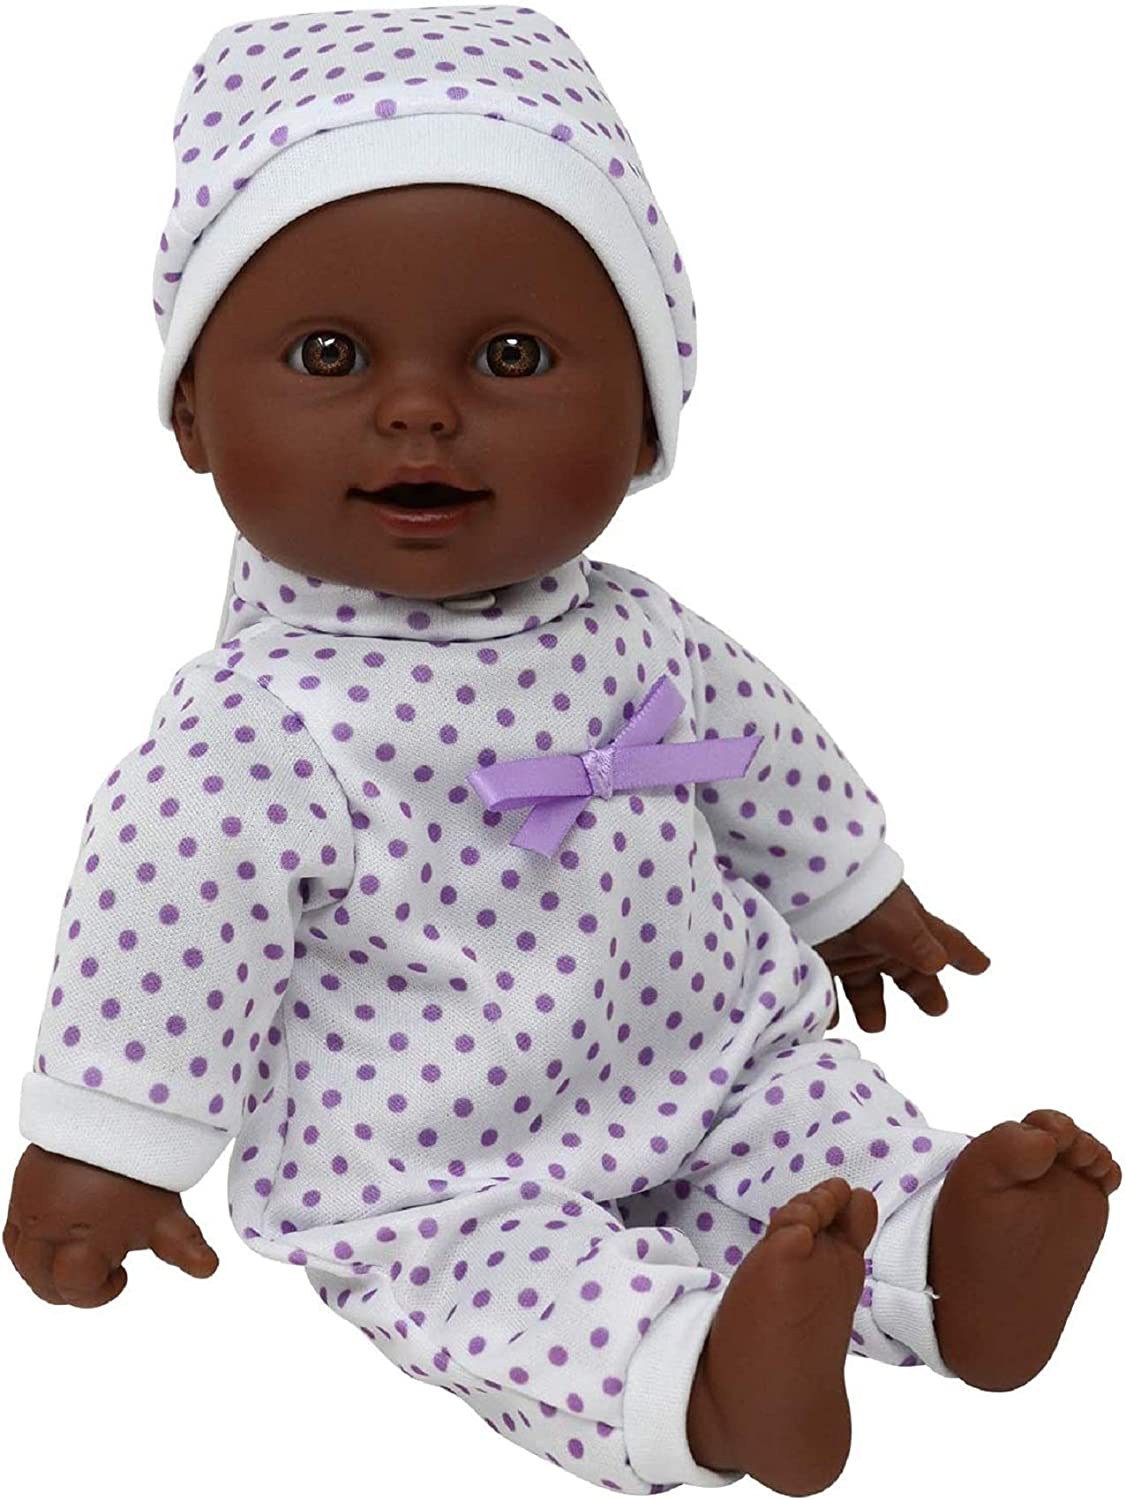 New York Doll Collection Vinyl Baby Doll For 5-Year-Old Girls, 11-Inch